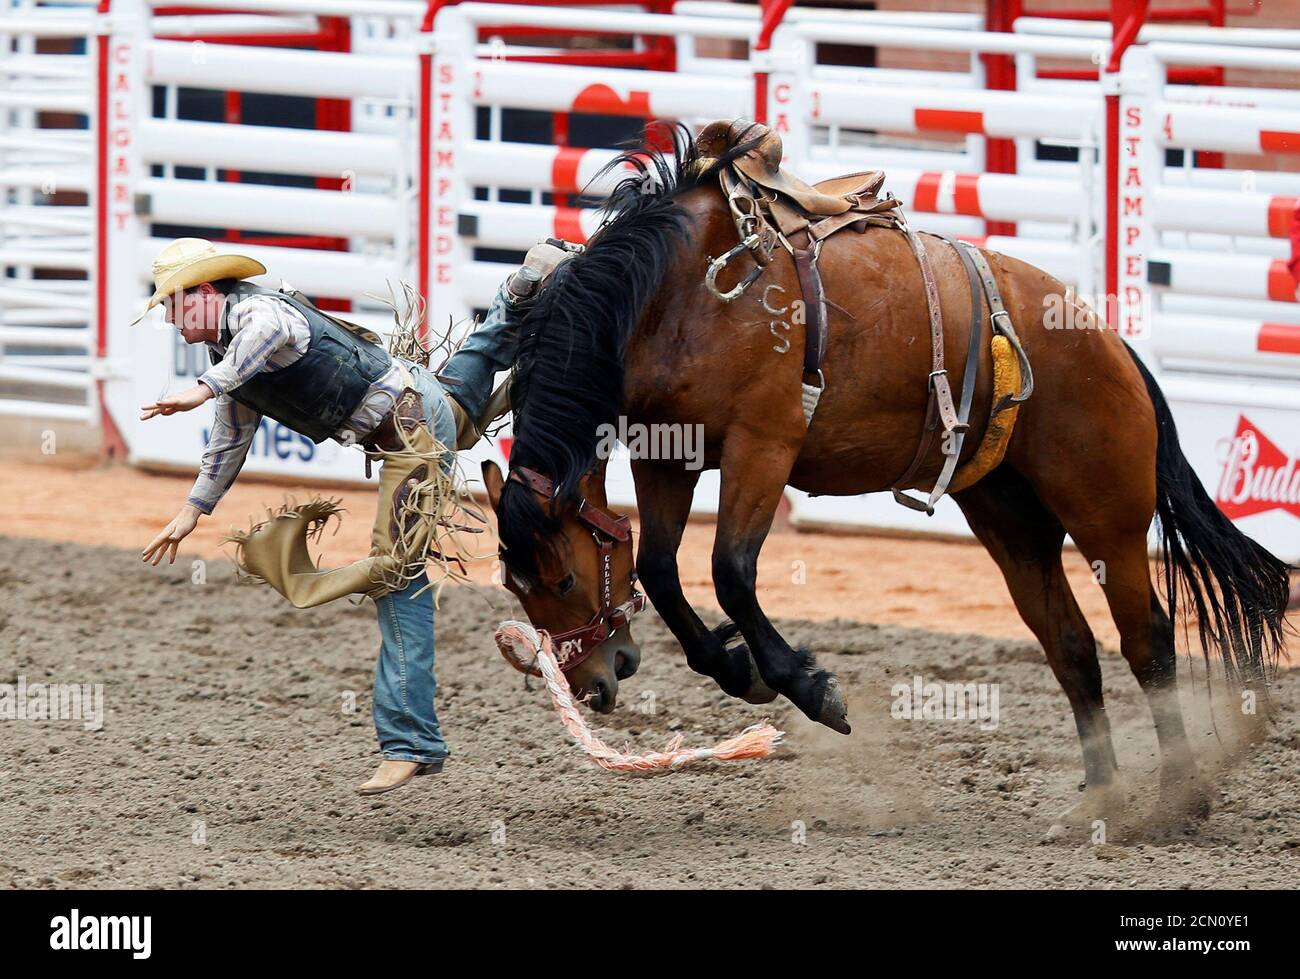 Rhett of Redig, South Dakota, gets bucked off the horse C Z8 in novice bronc event during the Calgary rodeo in Calgary, Alberta, Canada July 8, 2016. REUTERS/Todd